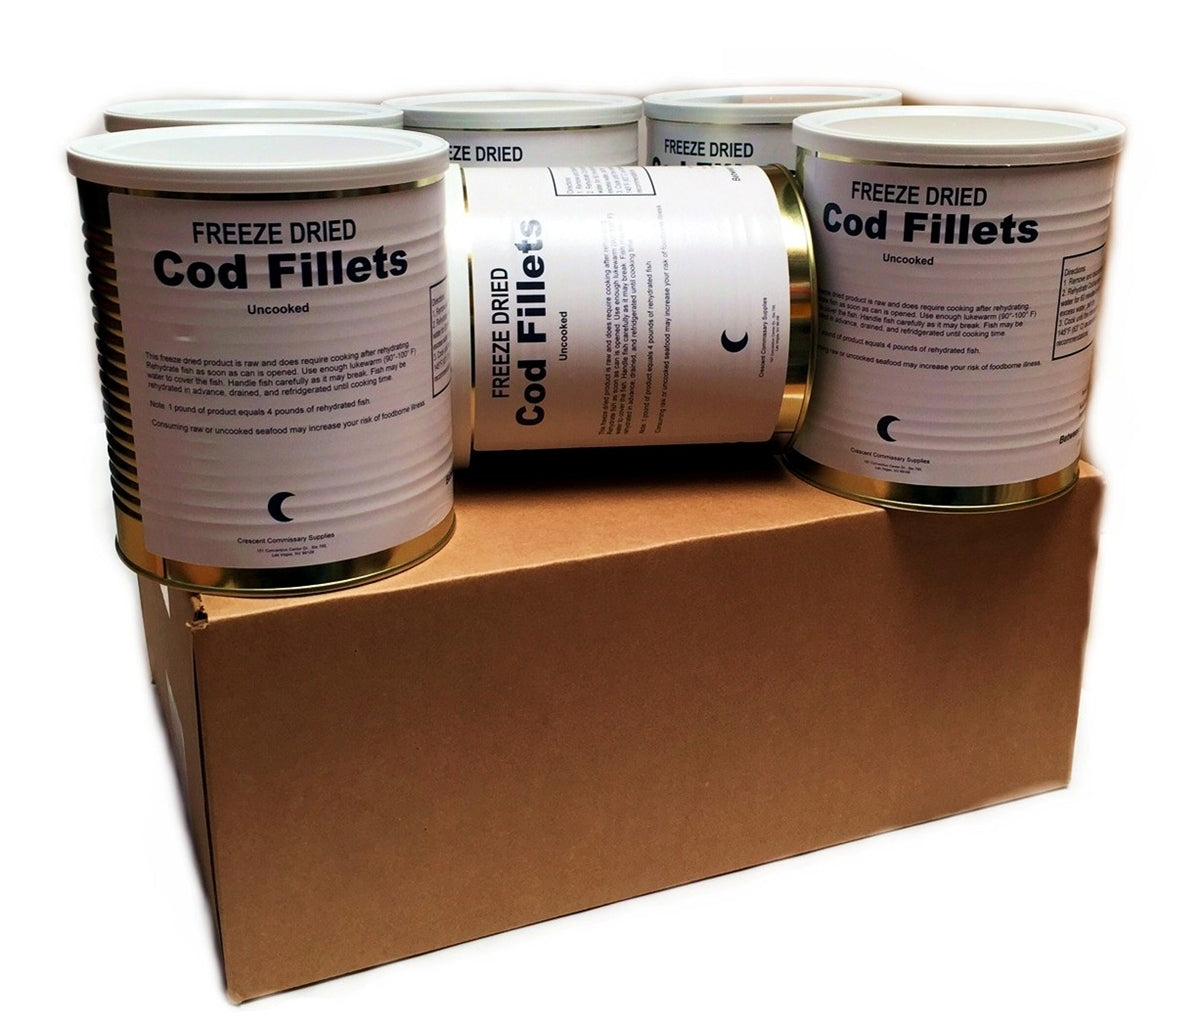 Military Surplus Freeze Dried Canned Cod Fish Fillets - Safecastle